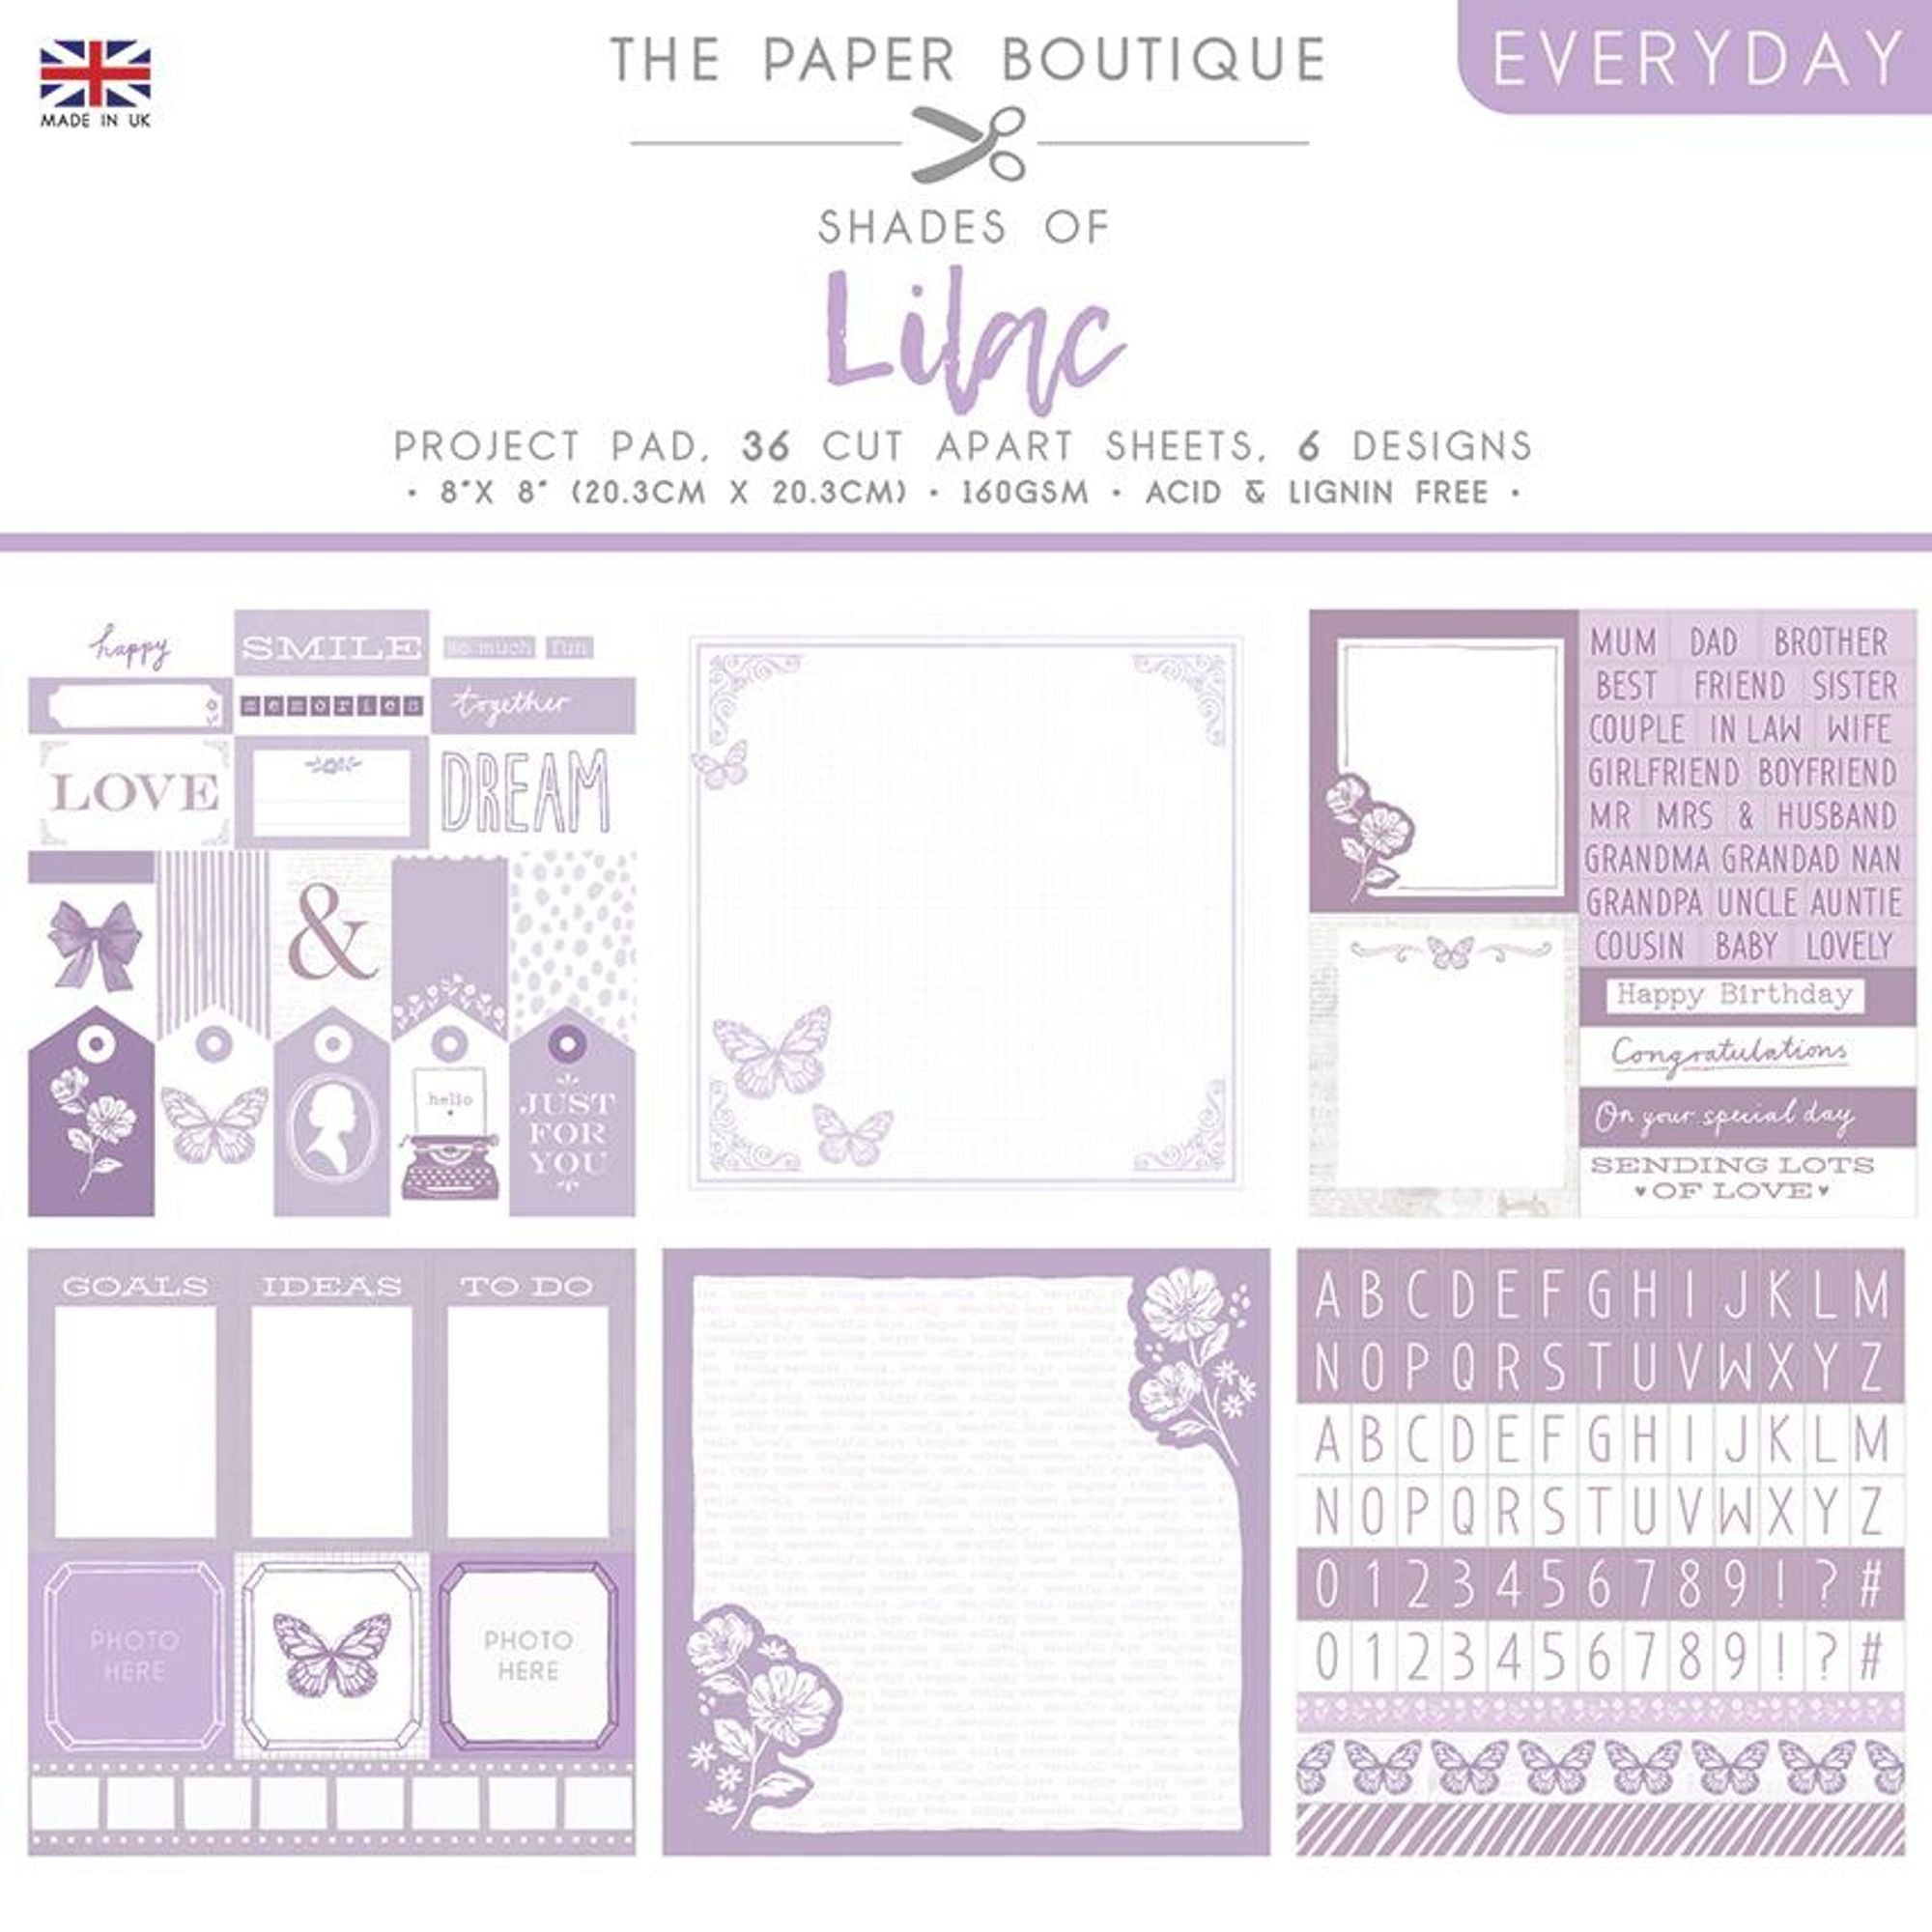 The Paper Boutique Everyday - Shades Of - Lilac 8 in x 8 in Project Pad